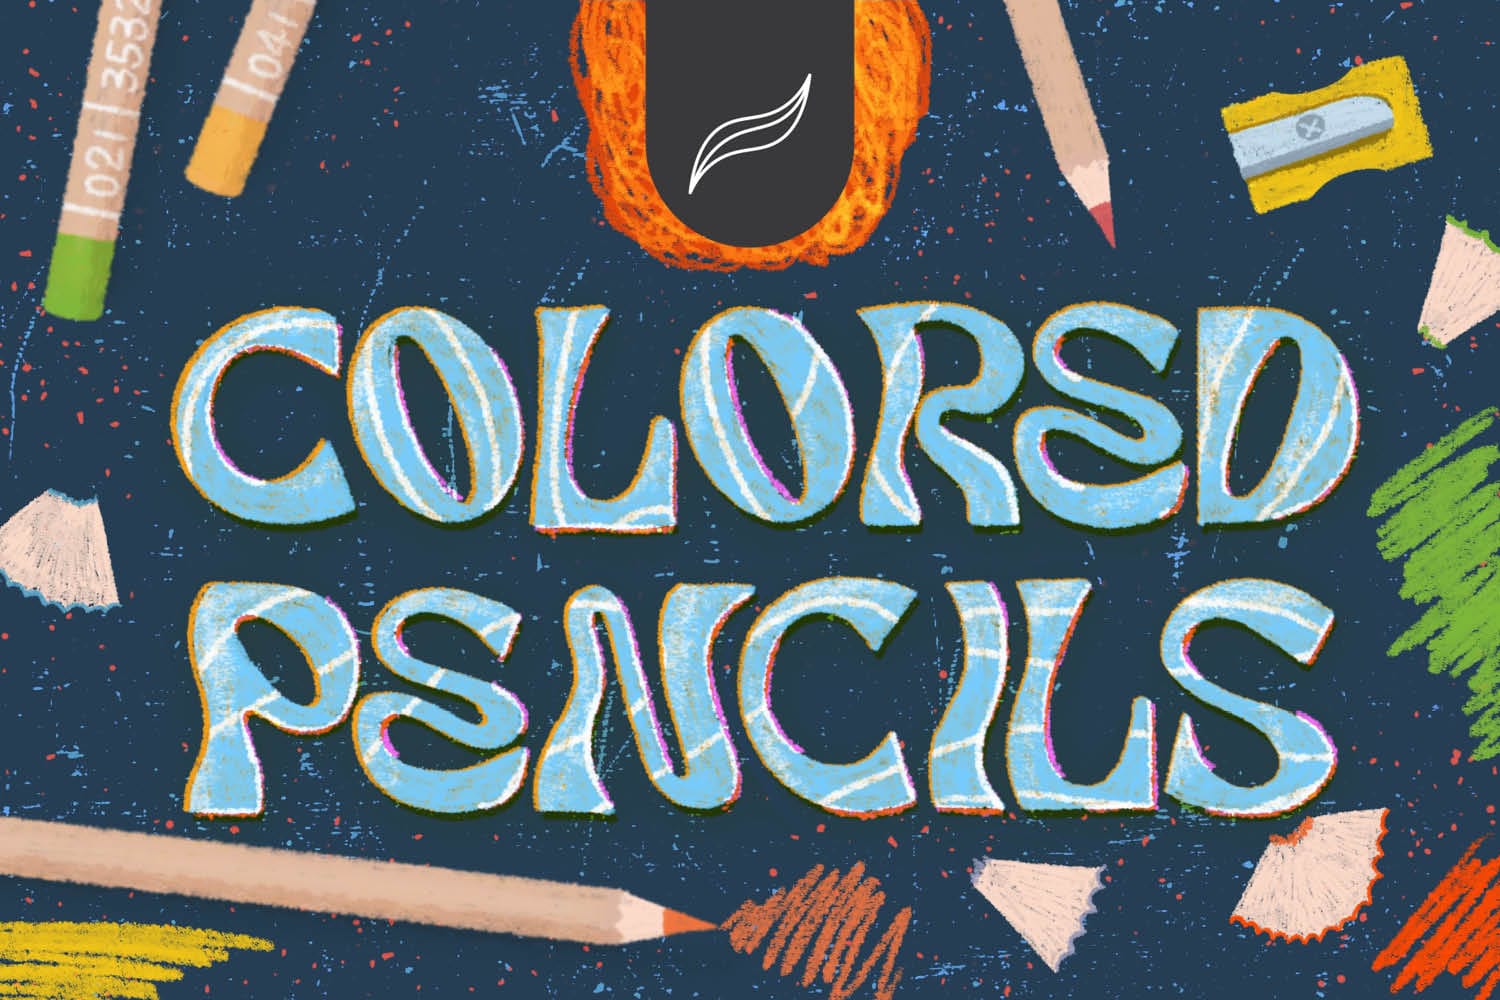 Illustration of Procreate Realistic Colored Pencils Brush Set 4-Pack, shavings, and an eraser surrounding the words "colored pencils" written in multicolored, chalk-like text on a blue background using Esther Nariyoshi Studio.